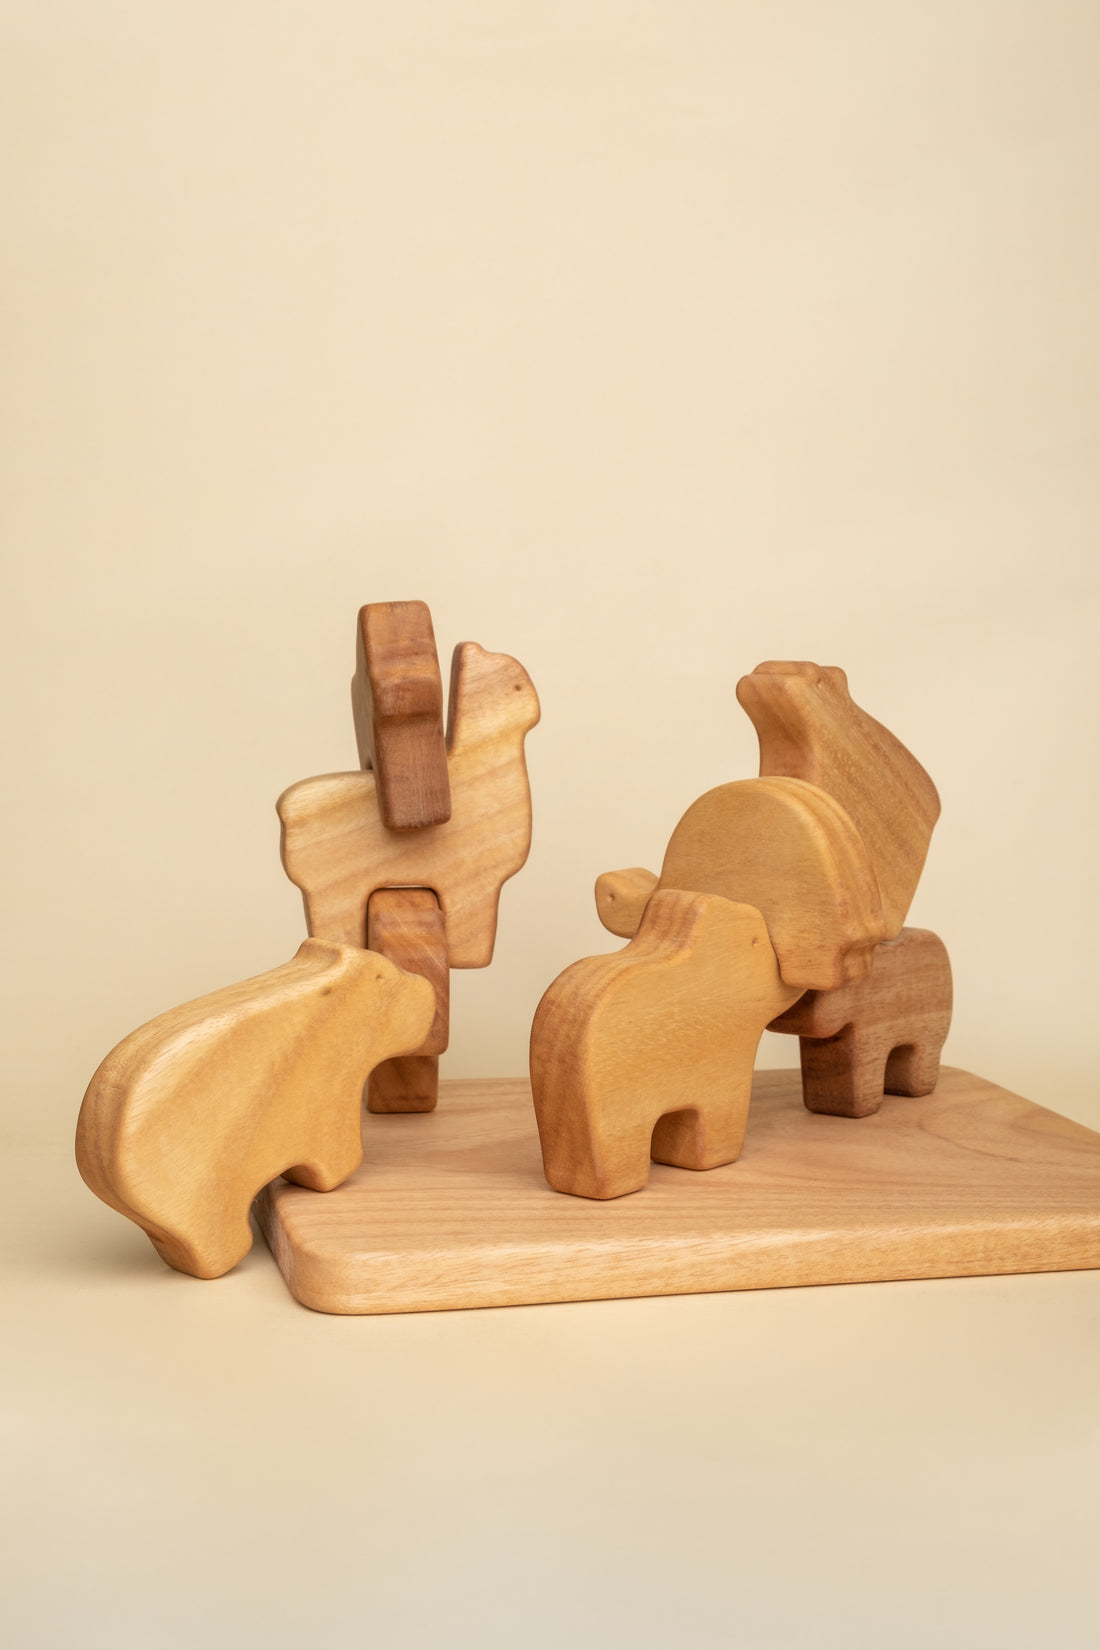 Wooden Toys & The Montessori Way of Learning: A Perfect Match